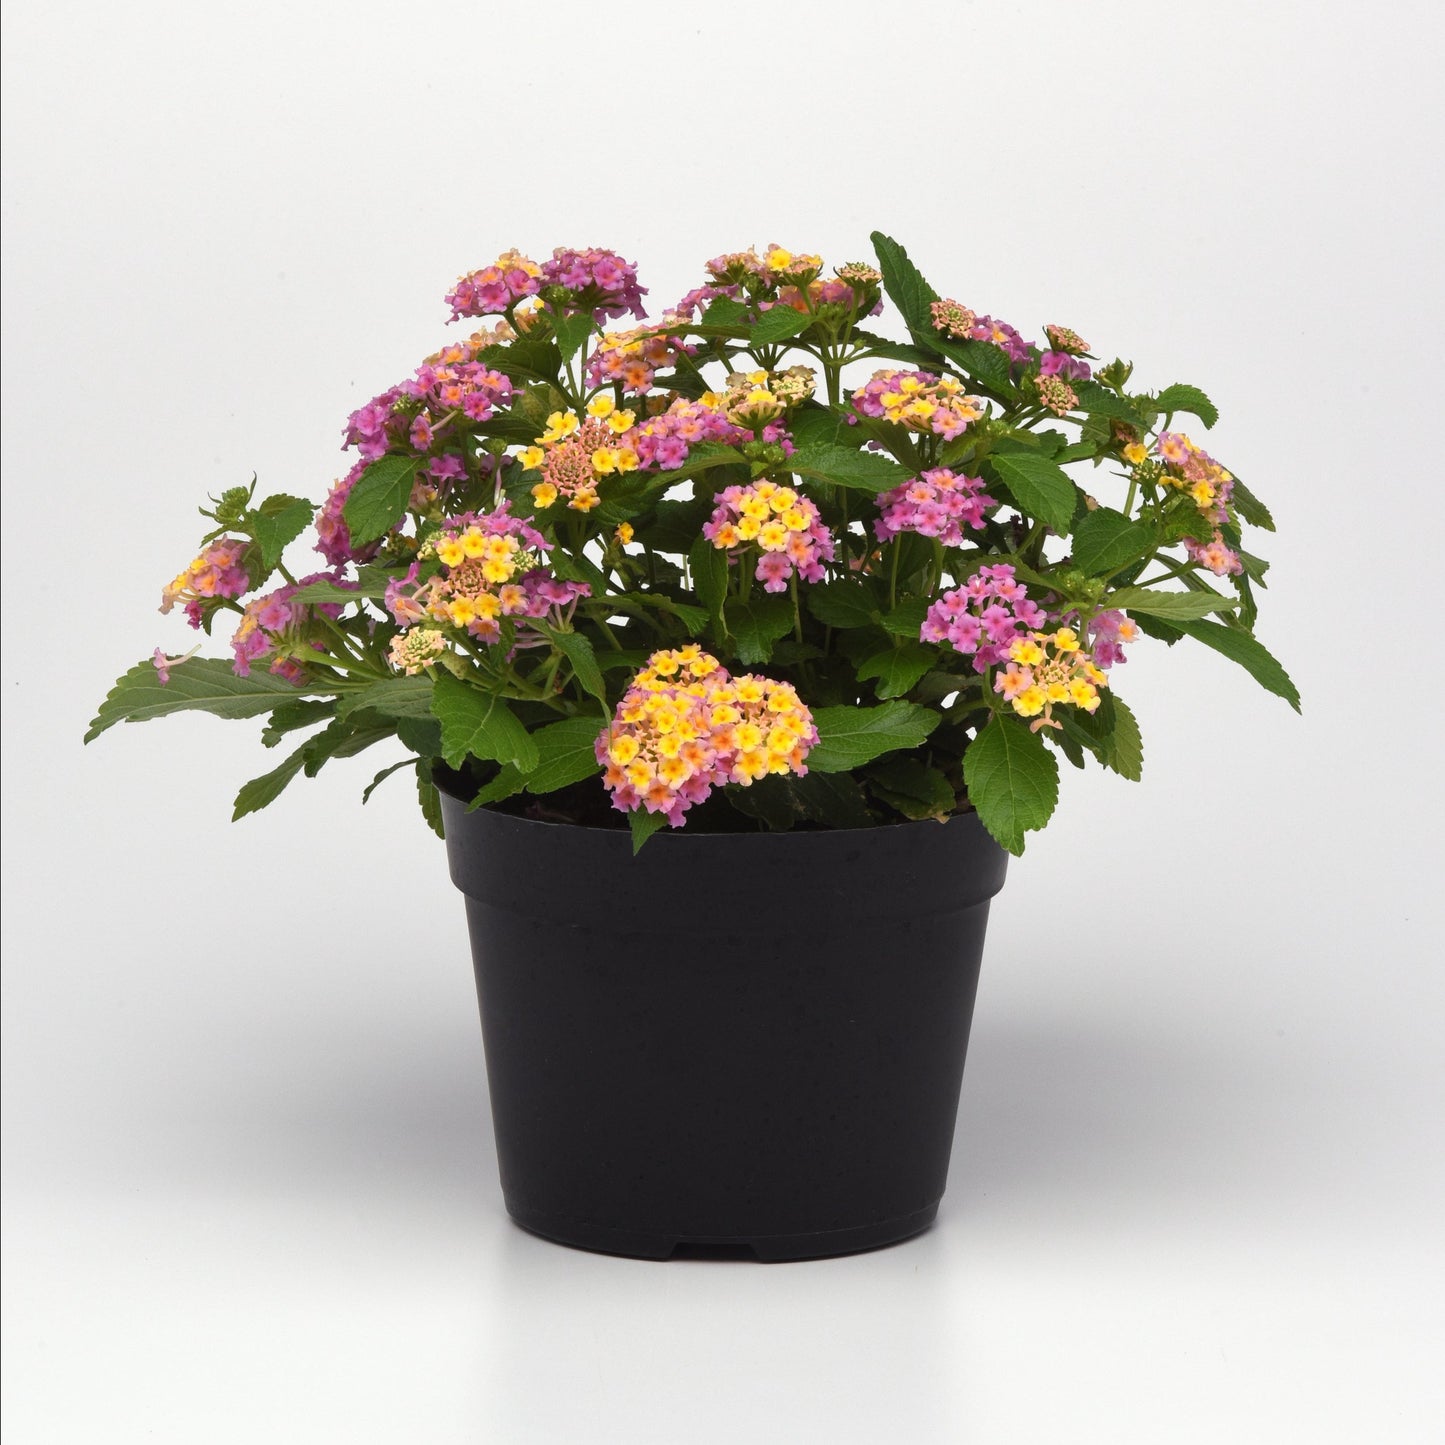 Lantana Lucky™ Pink Plantlings Live Baby Plants 1-3in., 6-Pack